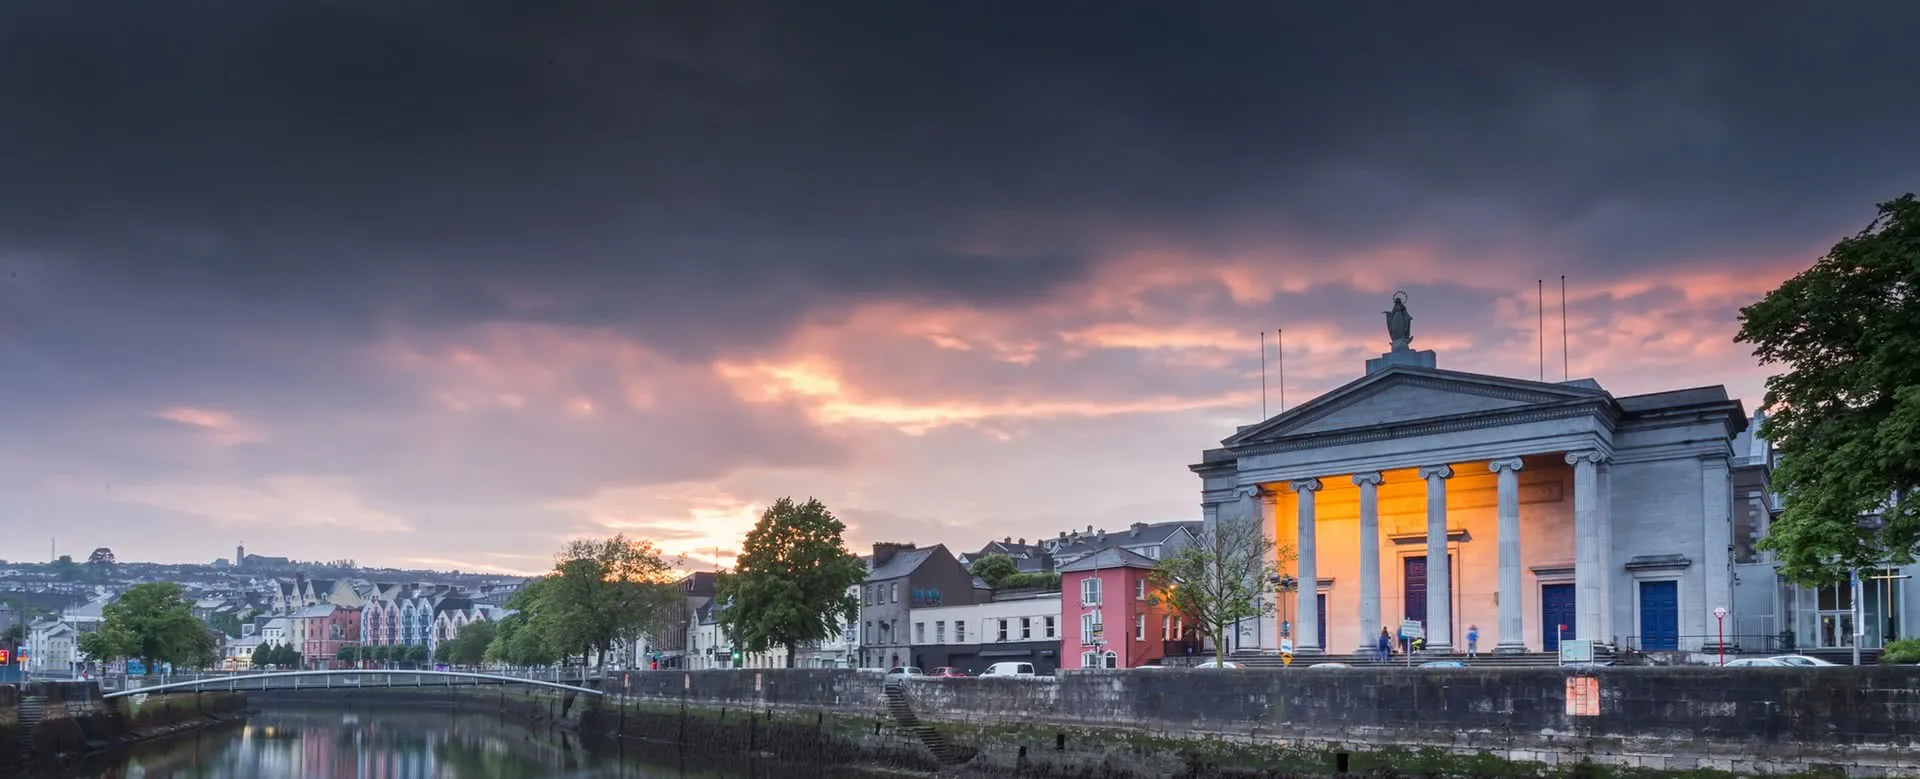 Cork - the destination with youth hostels